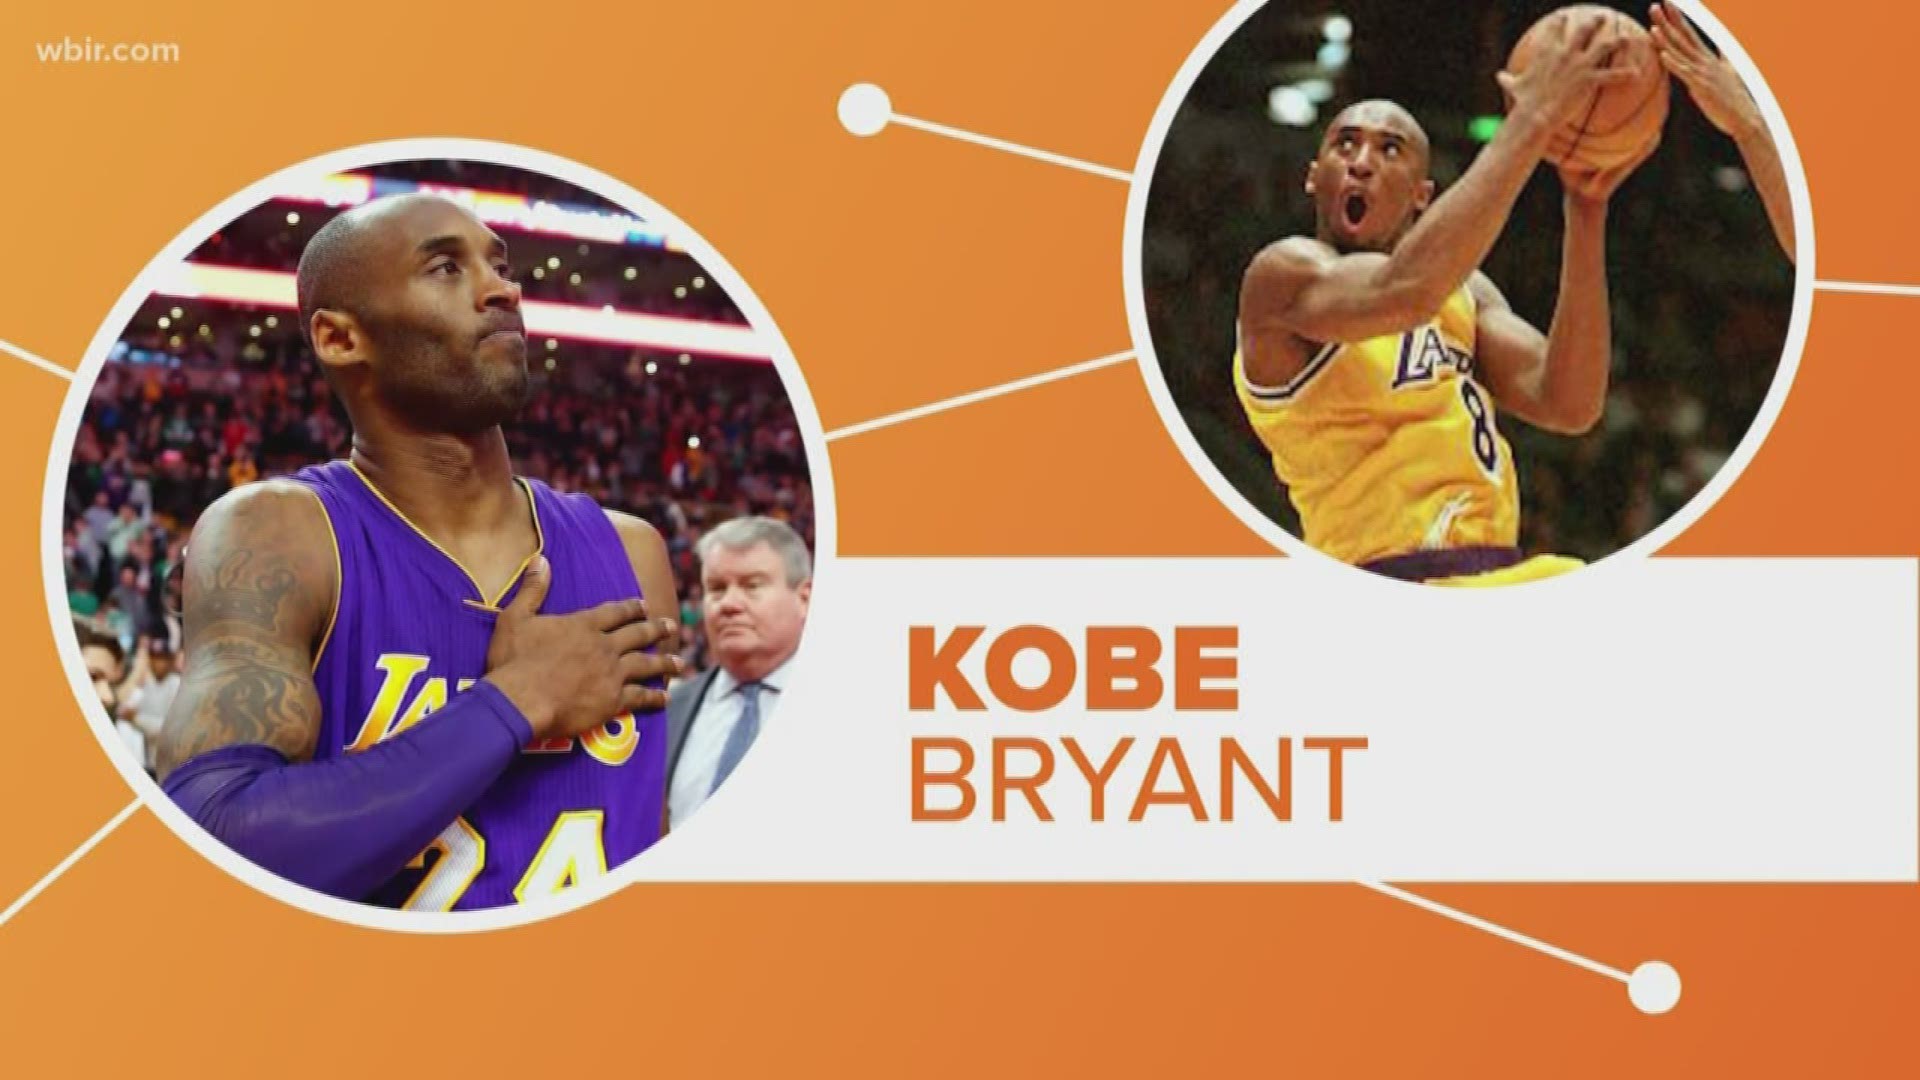 On this Connecting the Dots, we look into Kobe Bryant and his legacy.